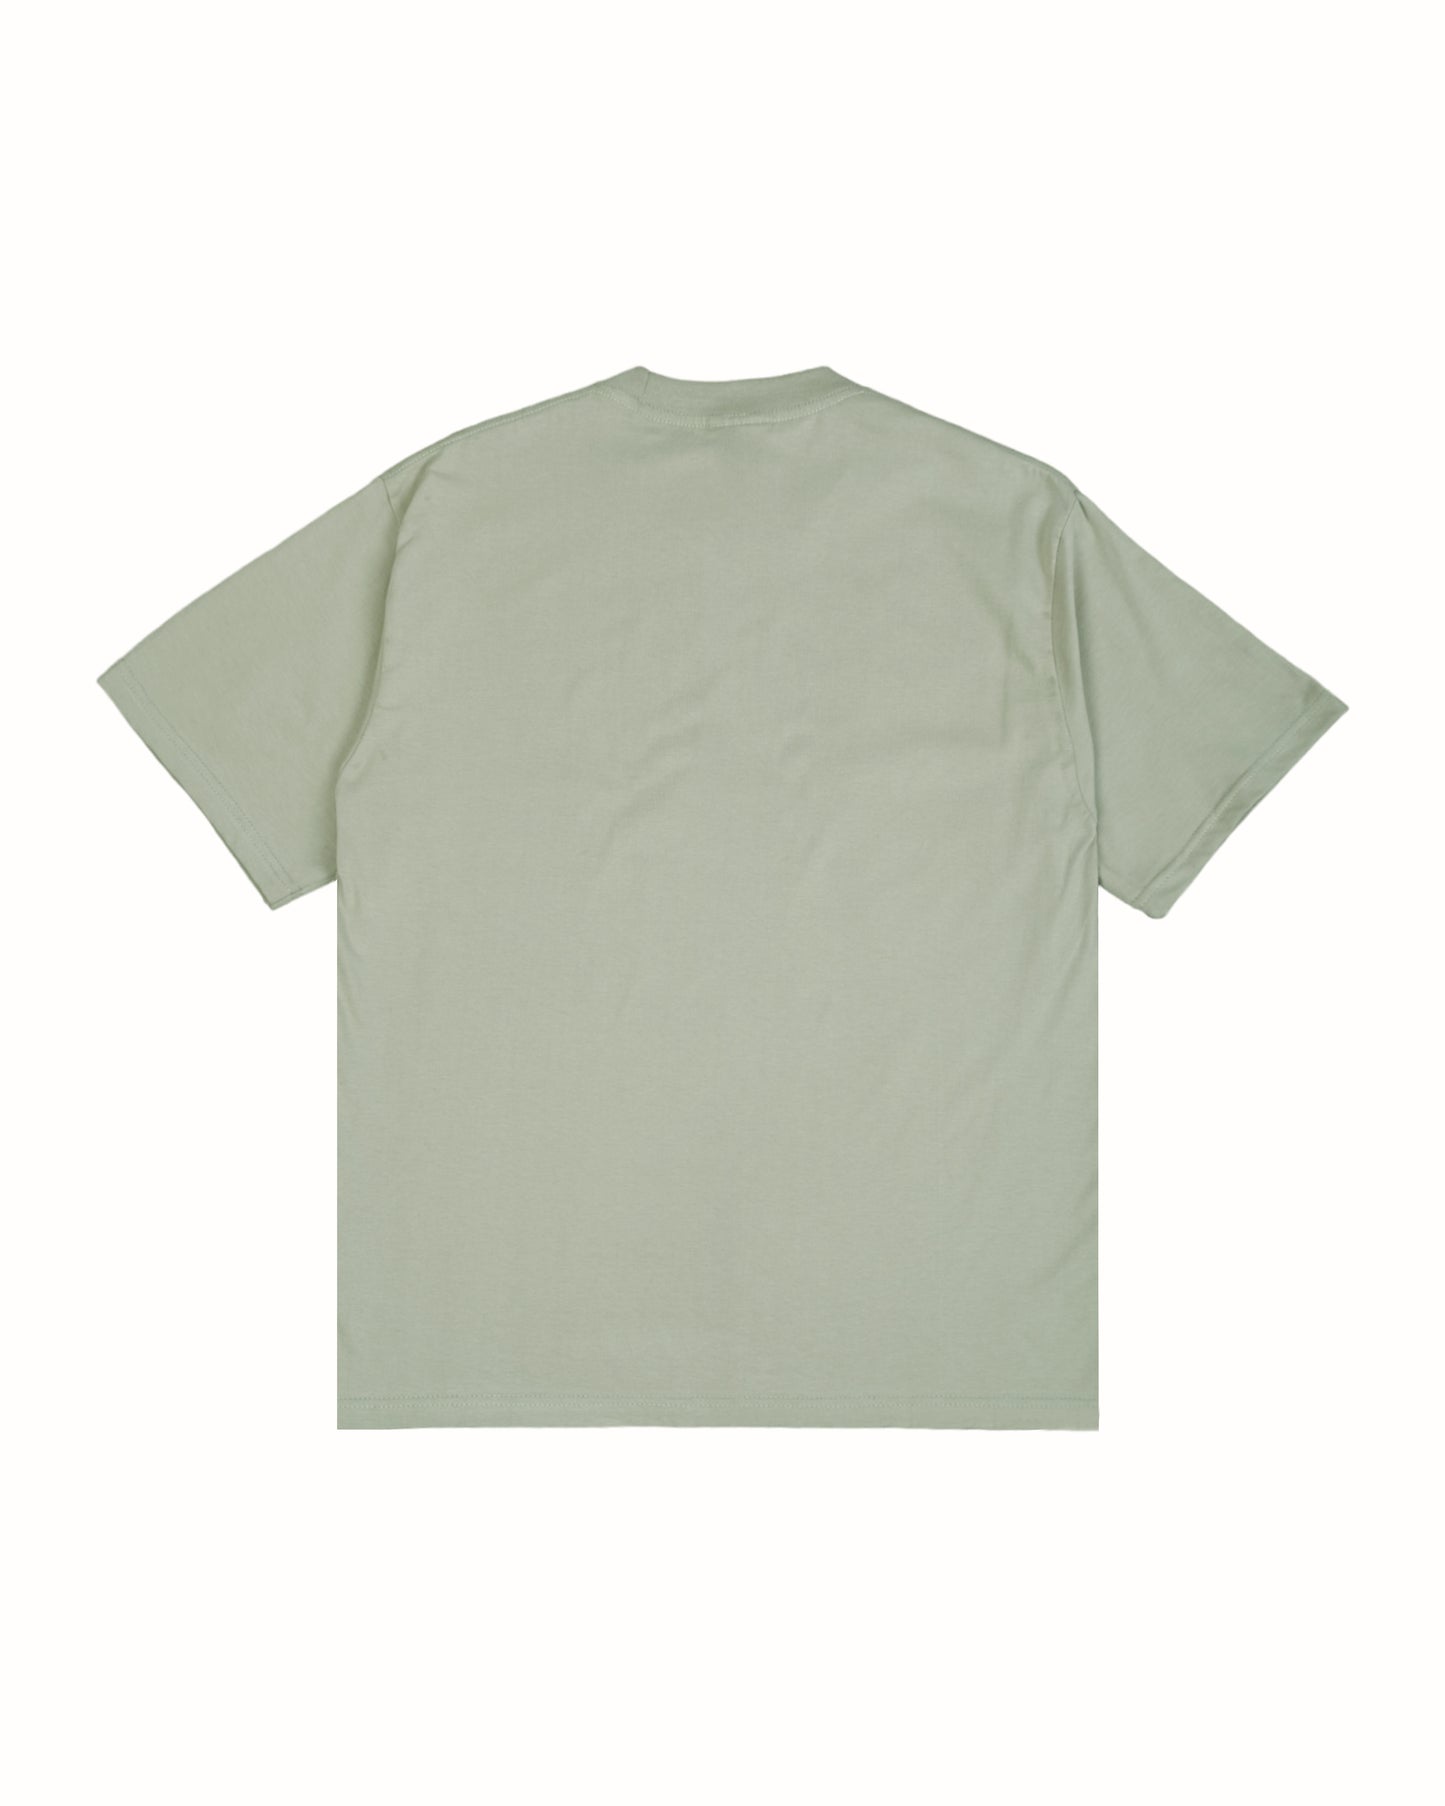 Notari Pale Green Relaxed Fit Tees